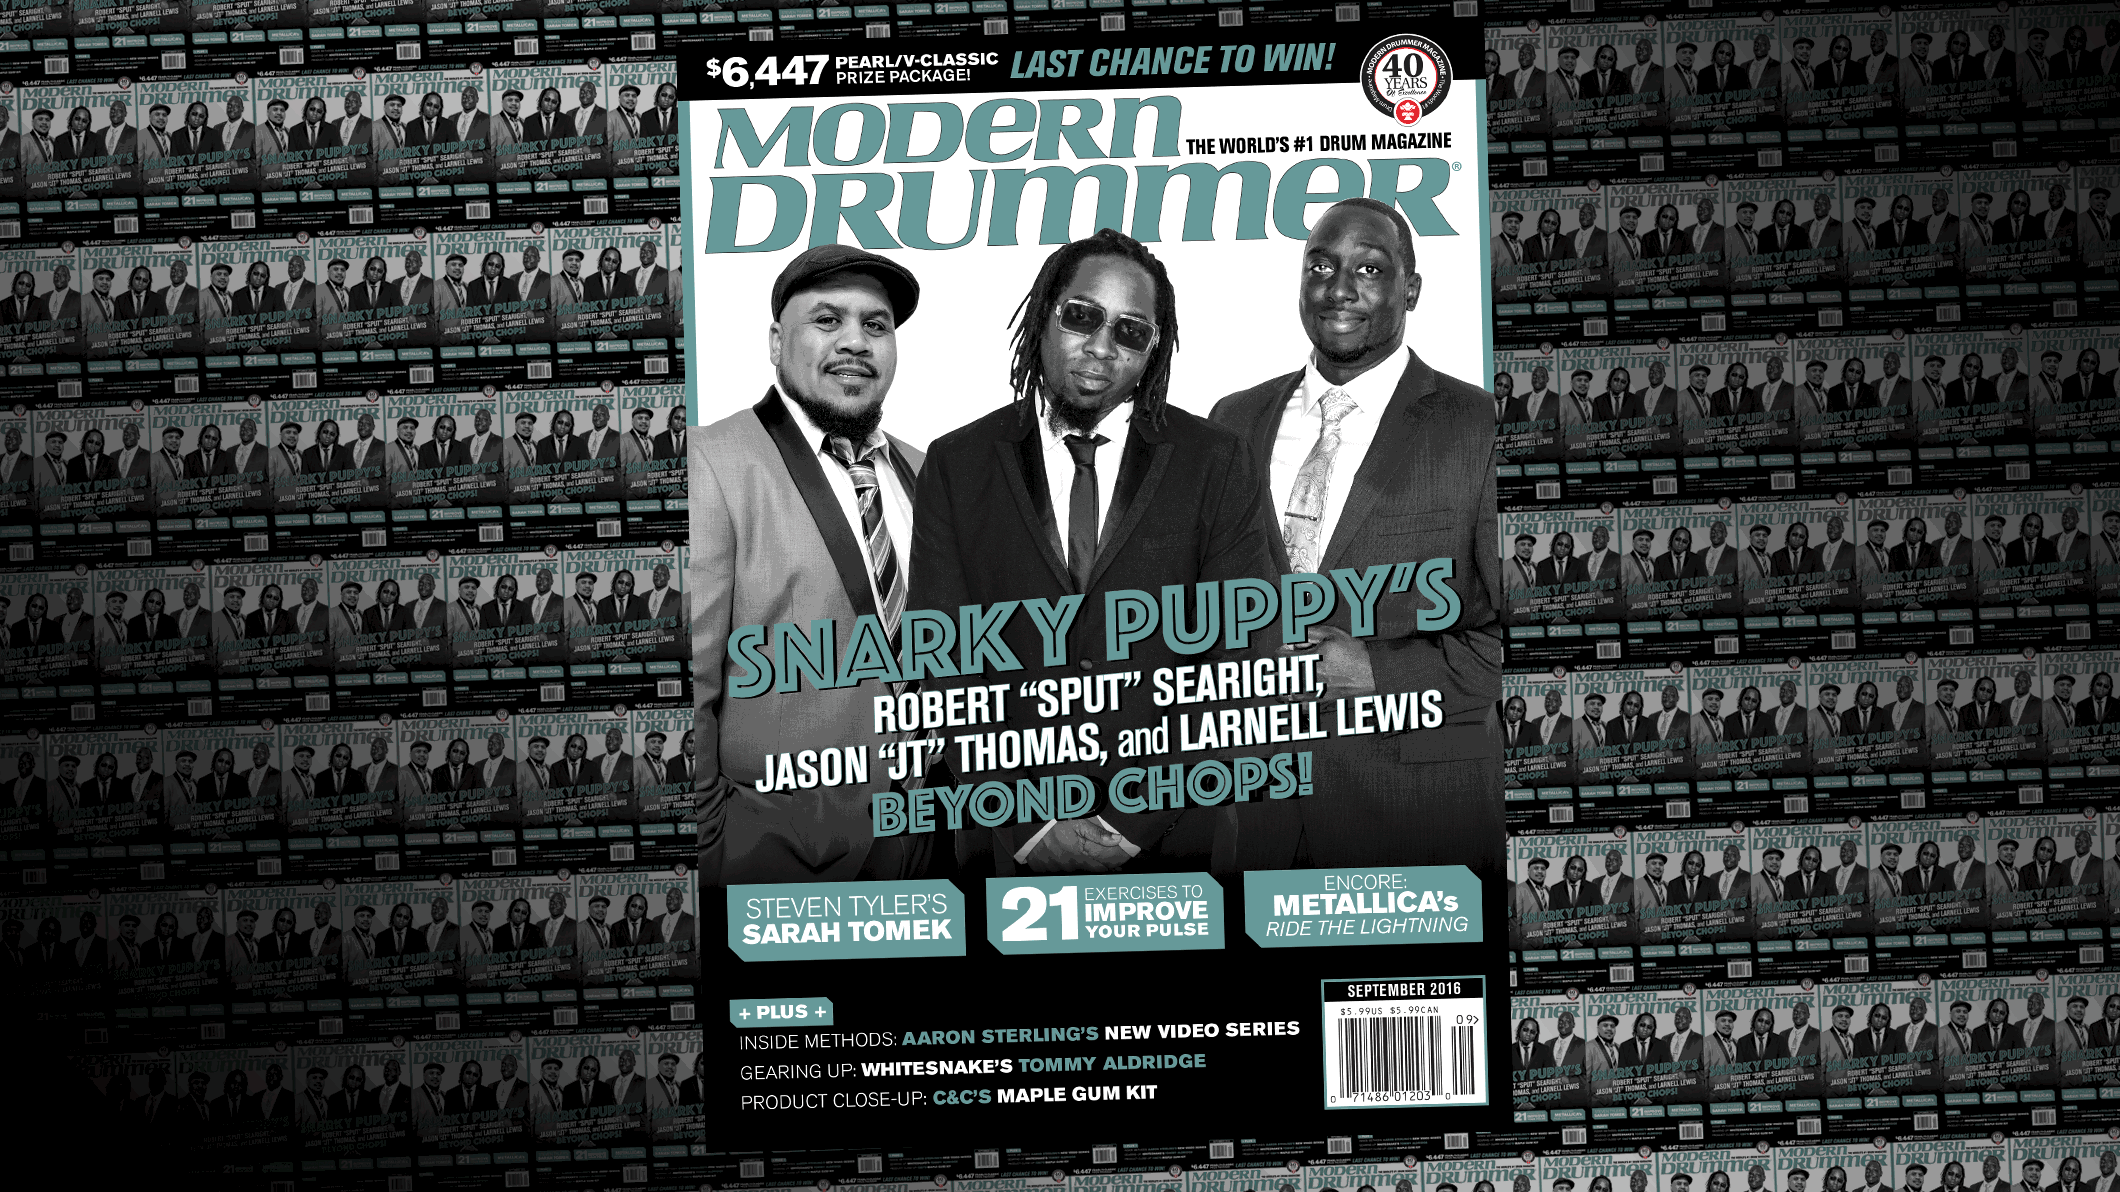 September 2016 Issue of Modern Drummer magazine featuring Snarky Puppy’s Robert “Sput” Searight, Larnell Lewis, and Jason “JT” Thomas